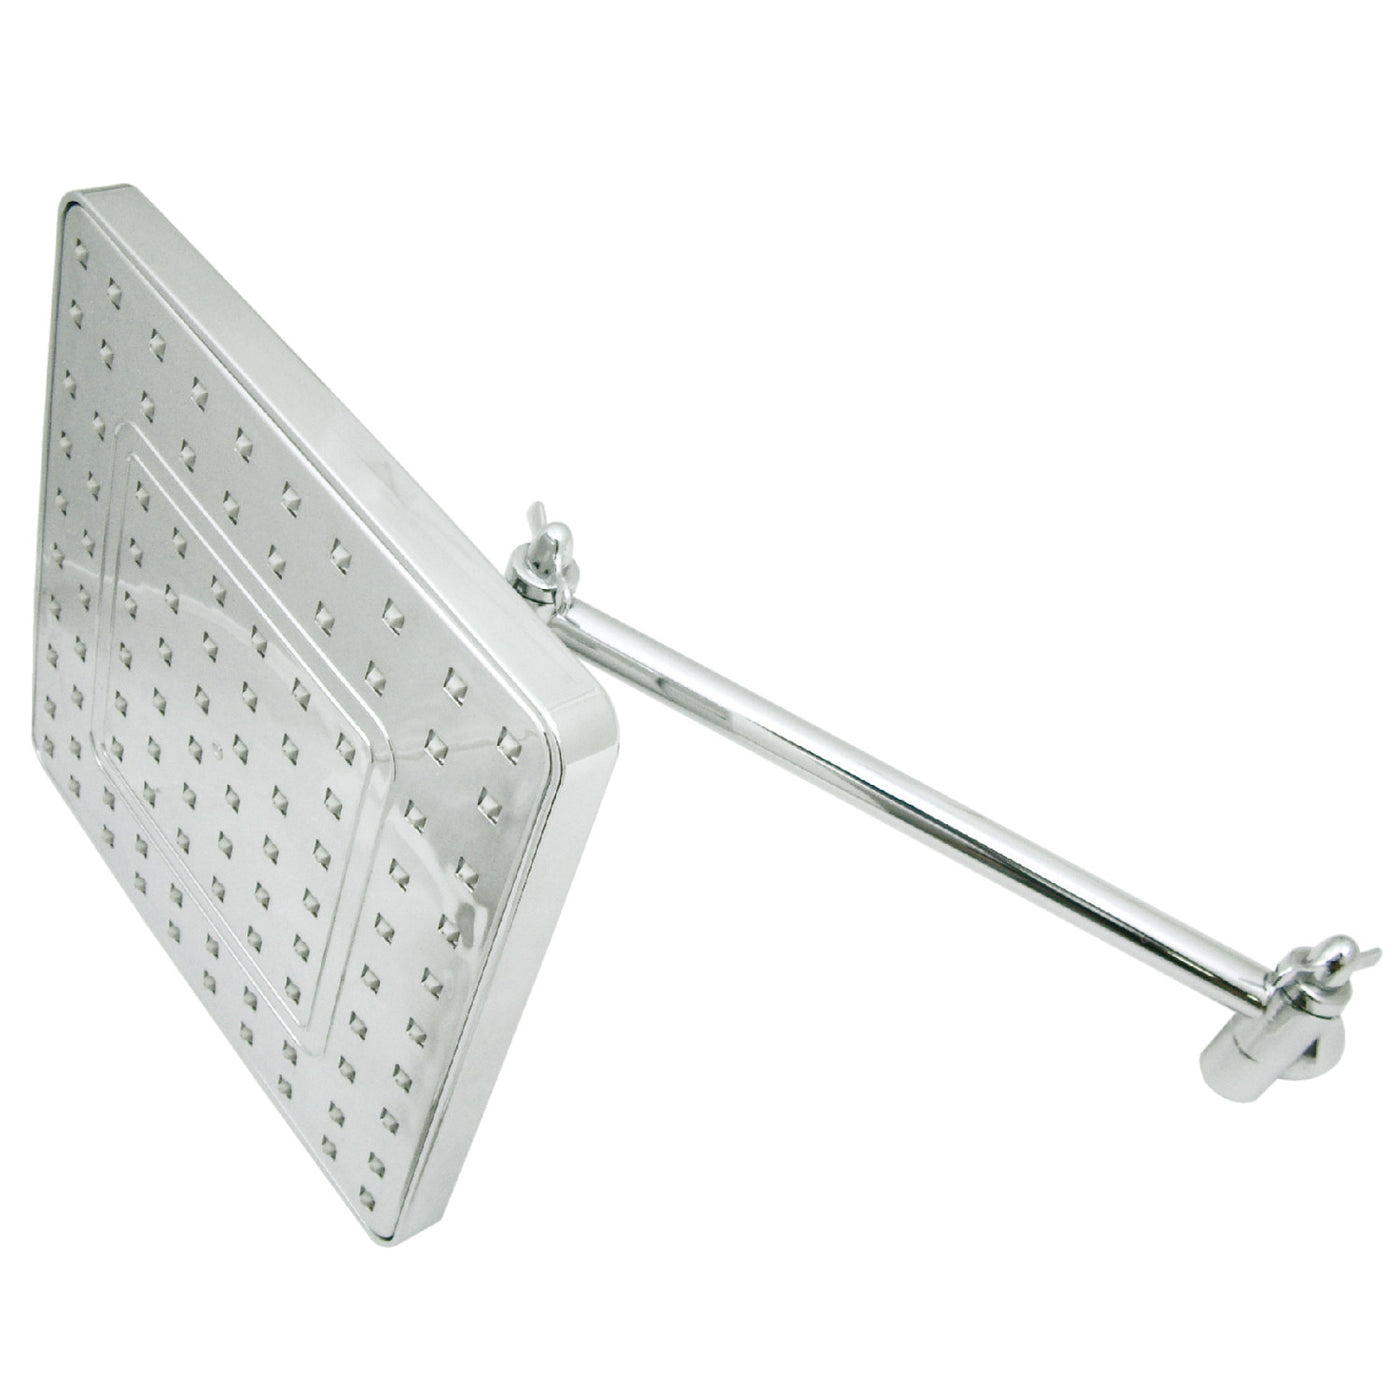 Elements of Design EX4641K1 8-Inch Square Shower Head with 10-Inch Shower Arm, Polished Chrome